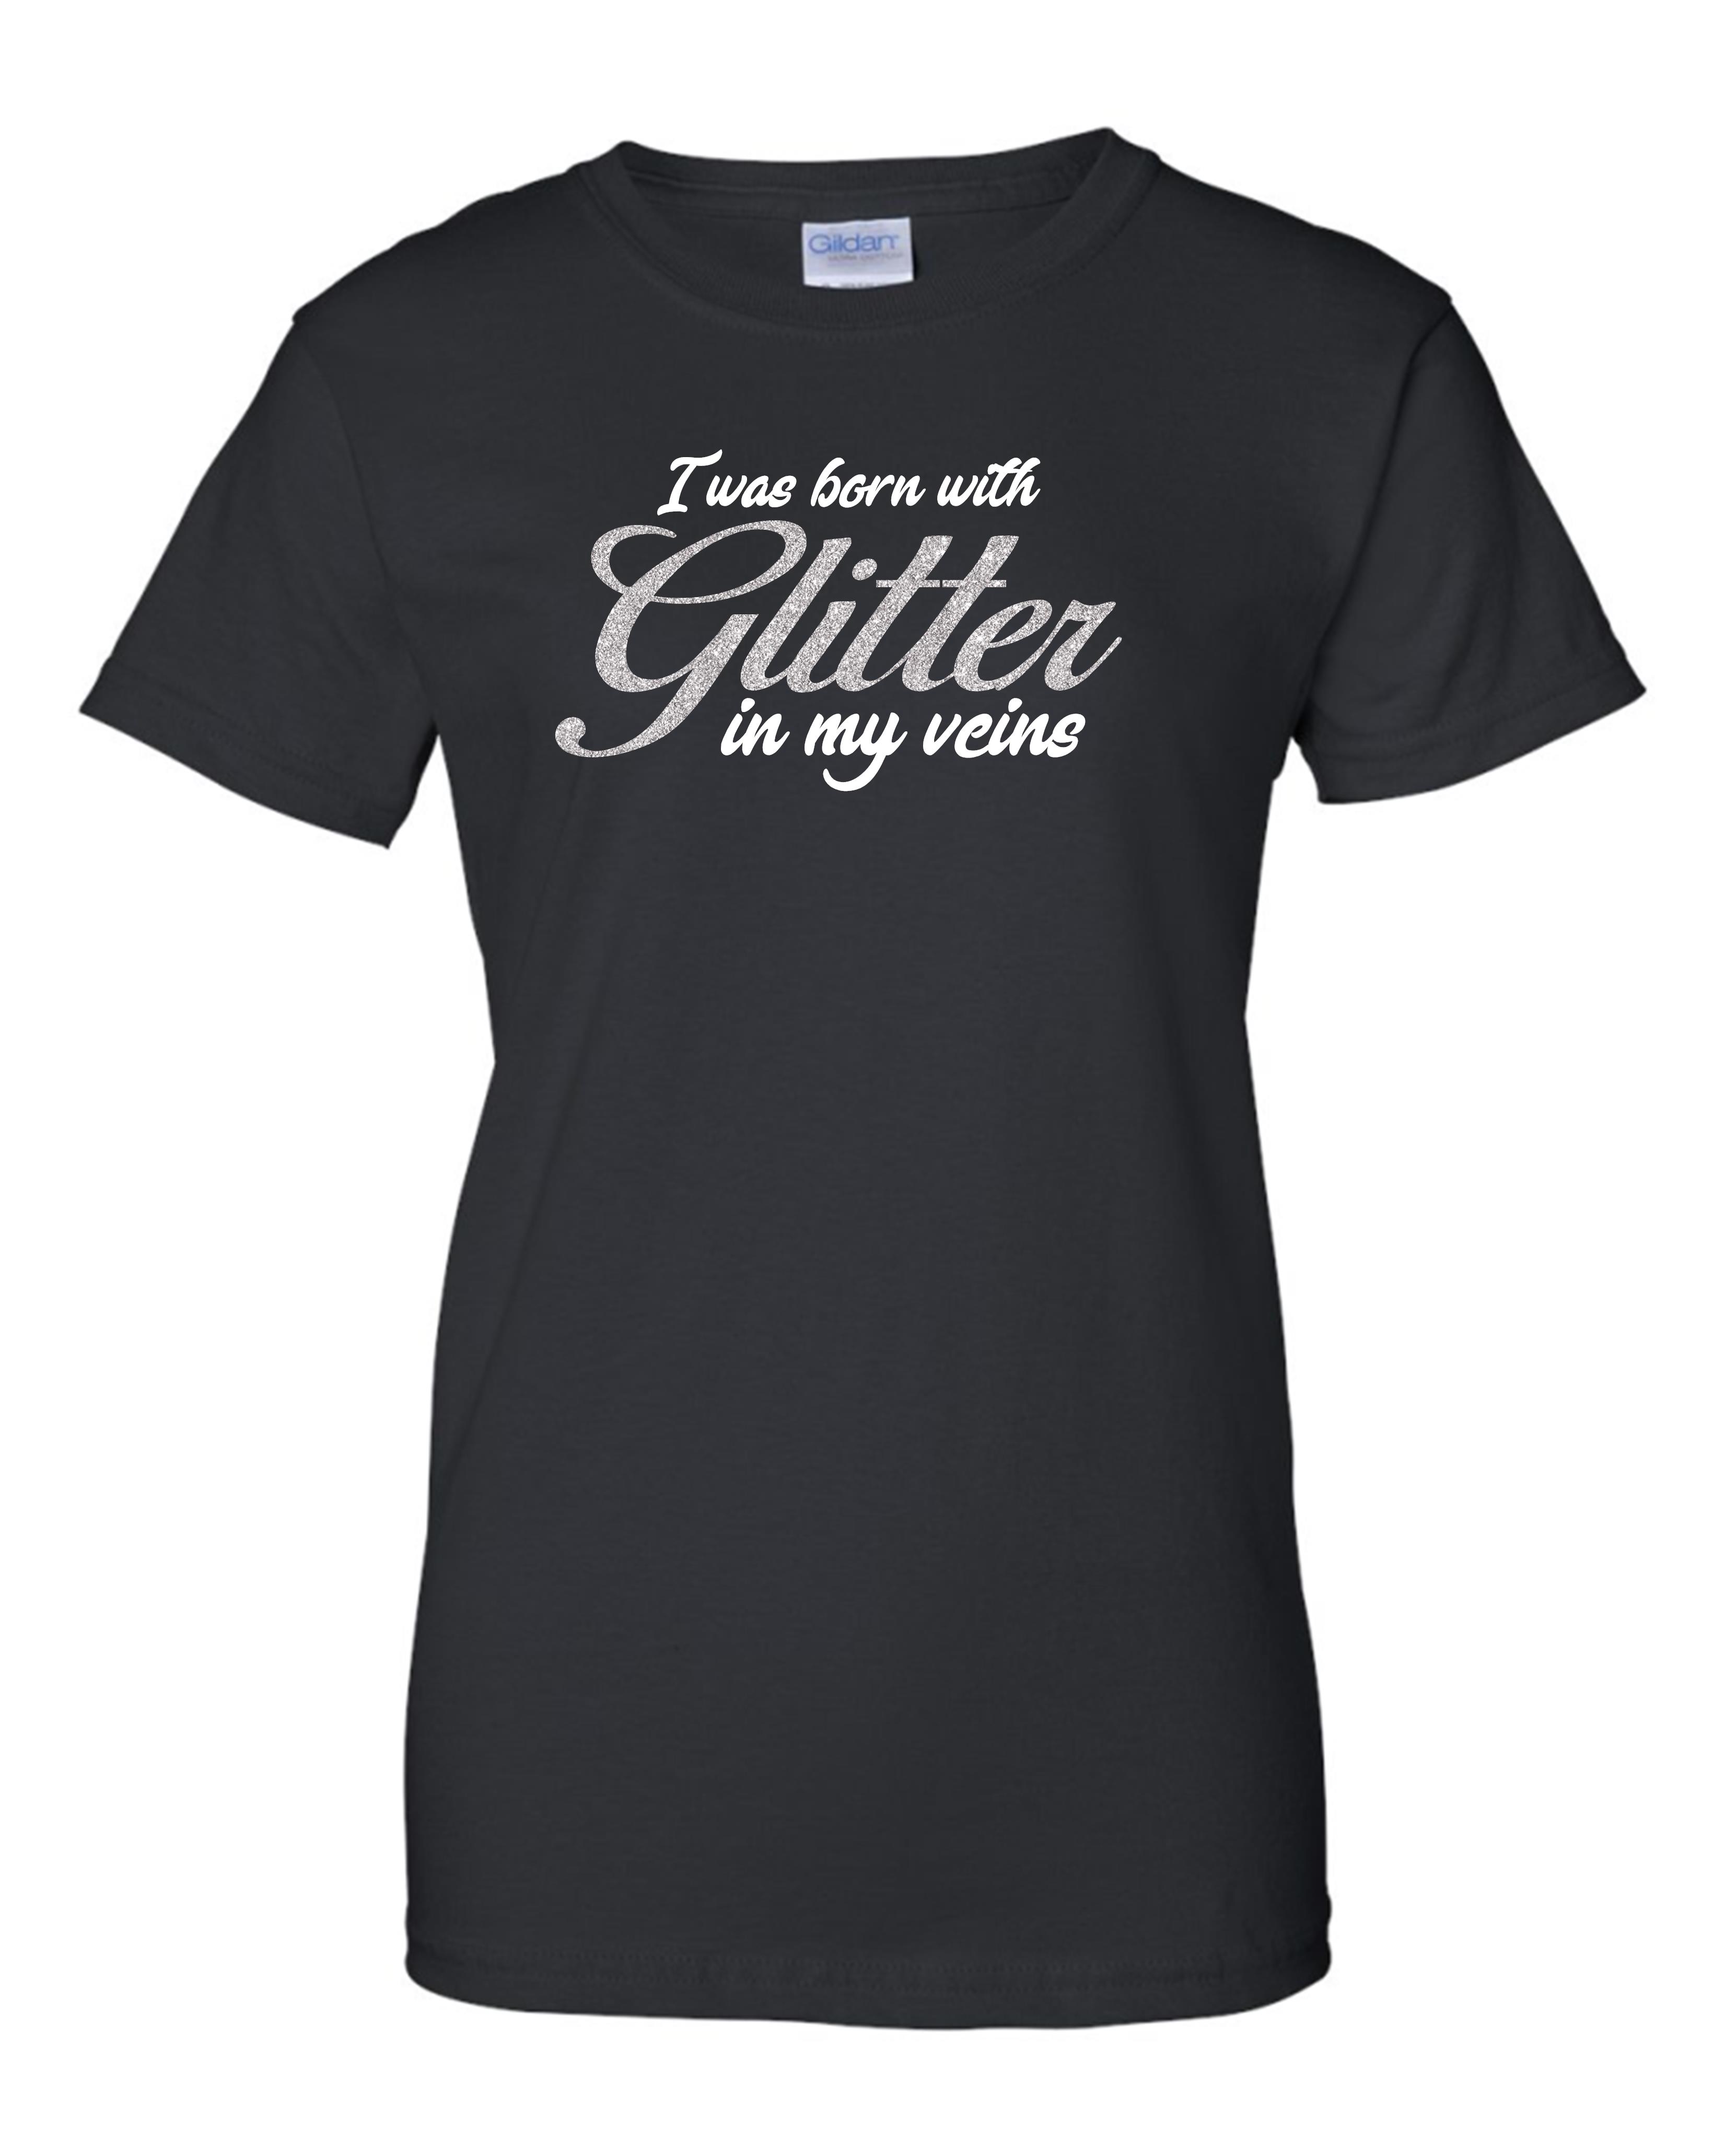 I was born with Glitter in my veins - Women's T-Shirt - G-WizGraphix